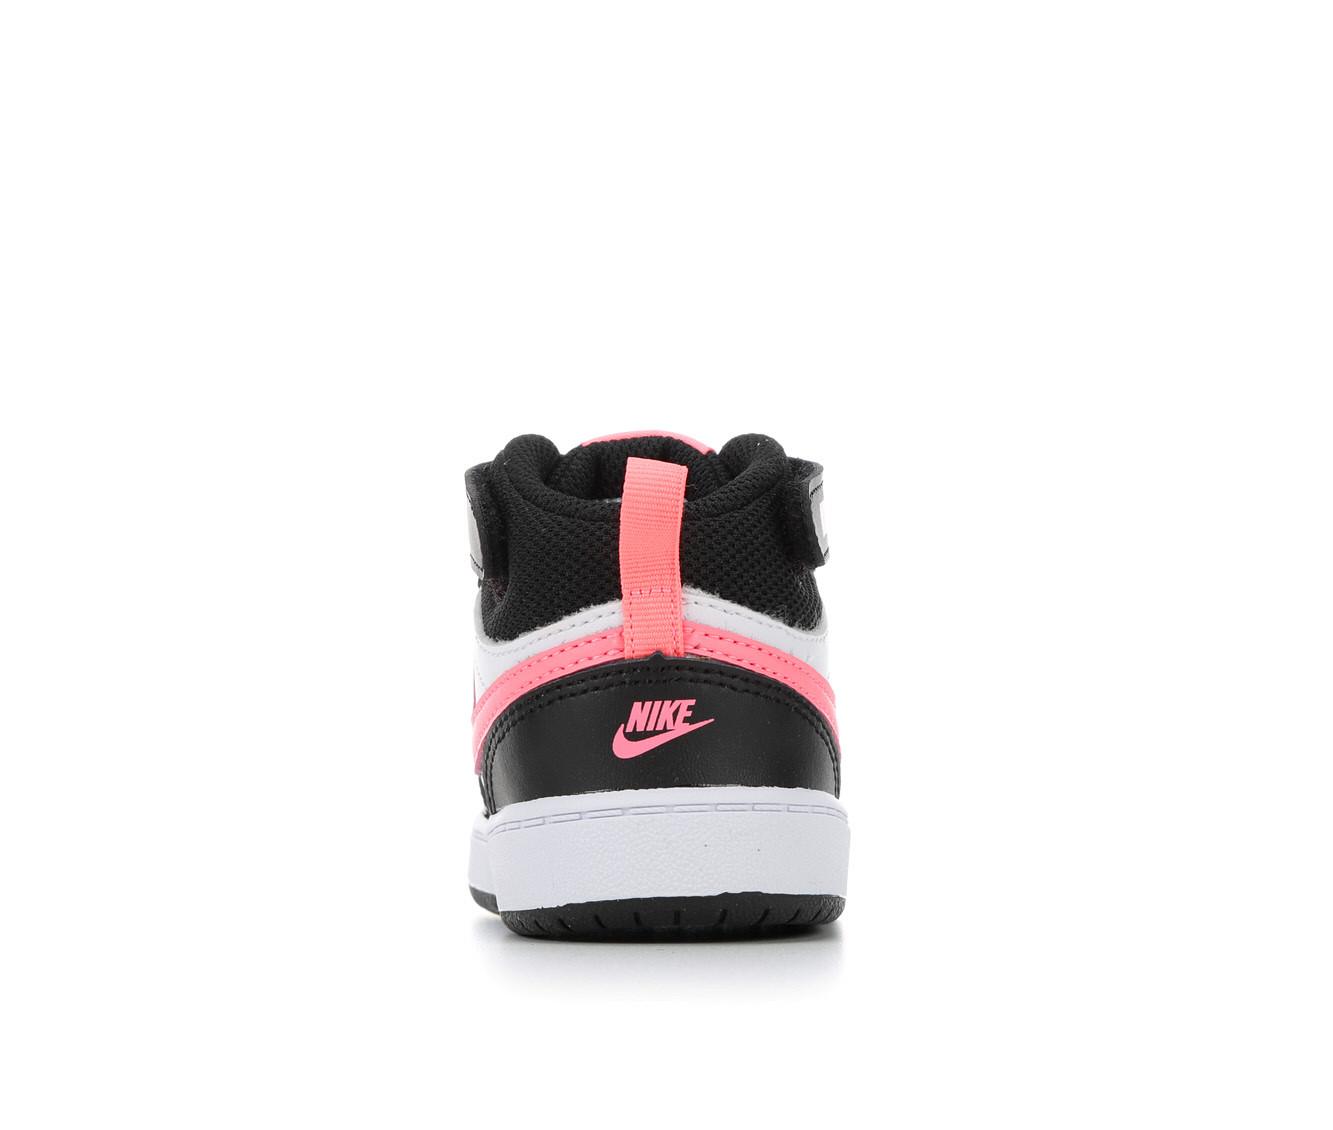 Girls #39 Nike Infant Toddler Court Borough Mid 2 Sneakers Shoe Carnival